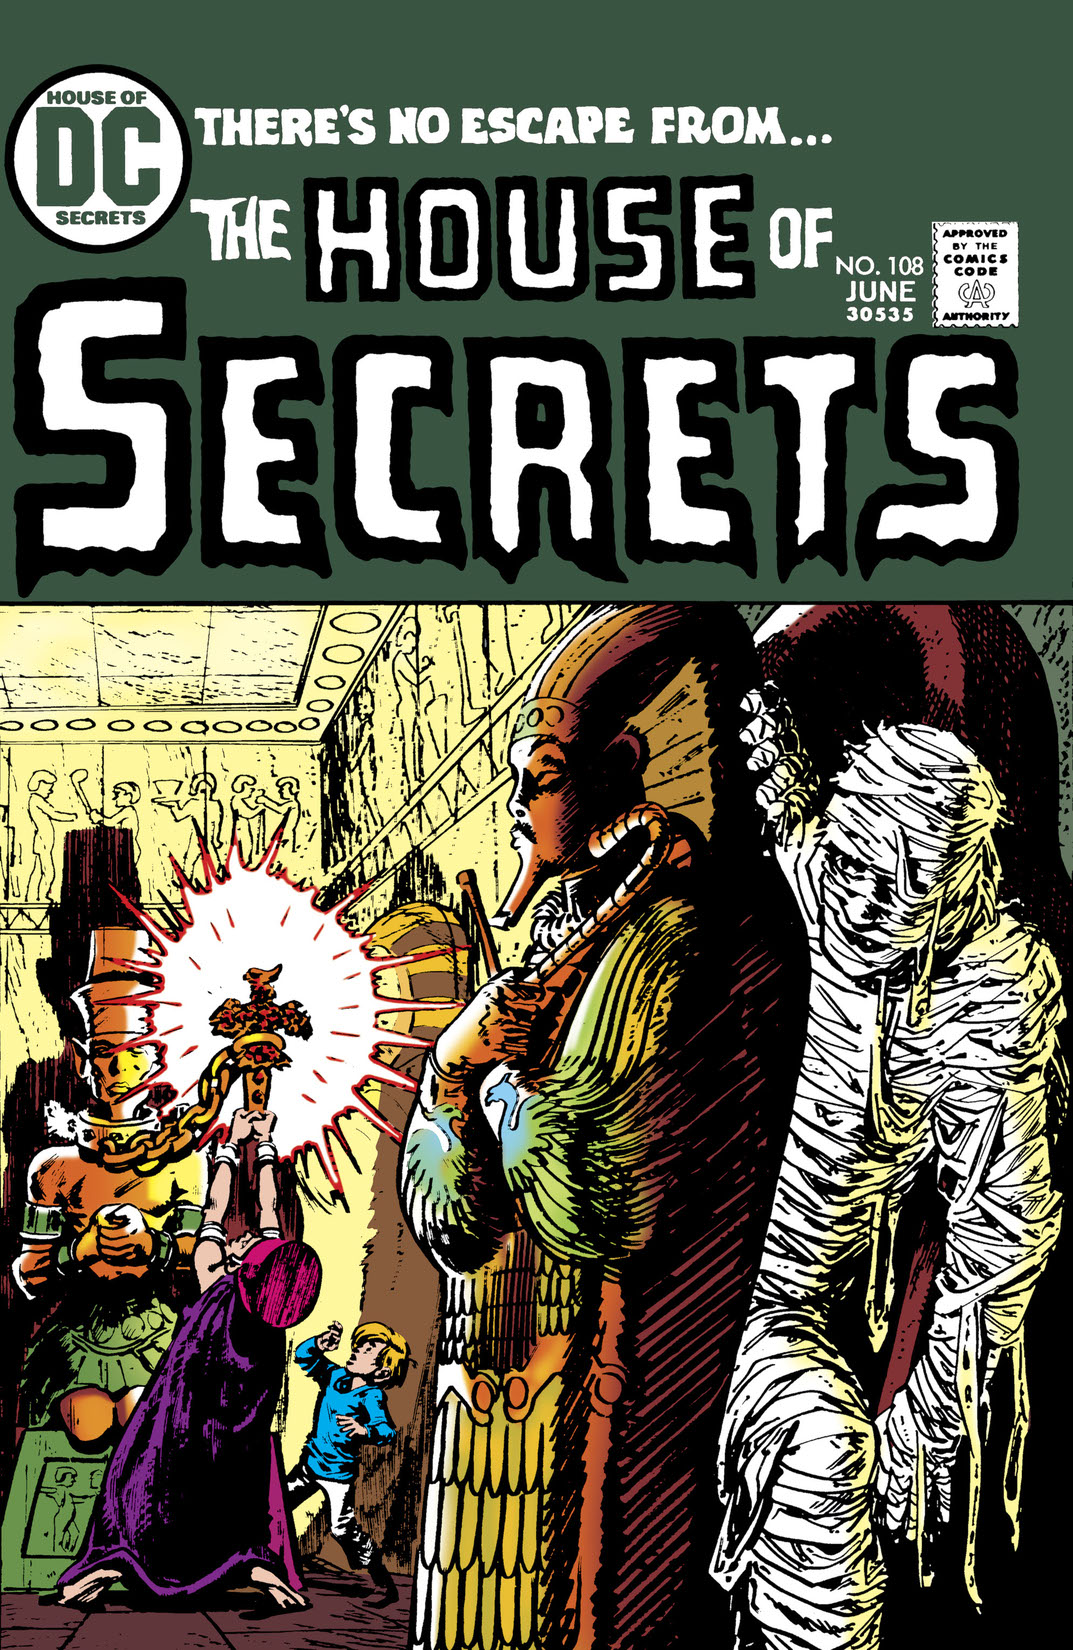 House of Secrets #108 preview images